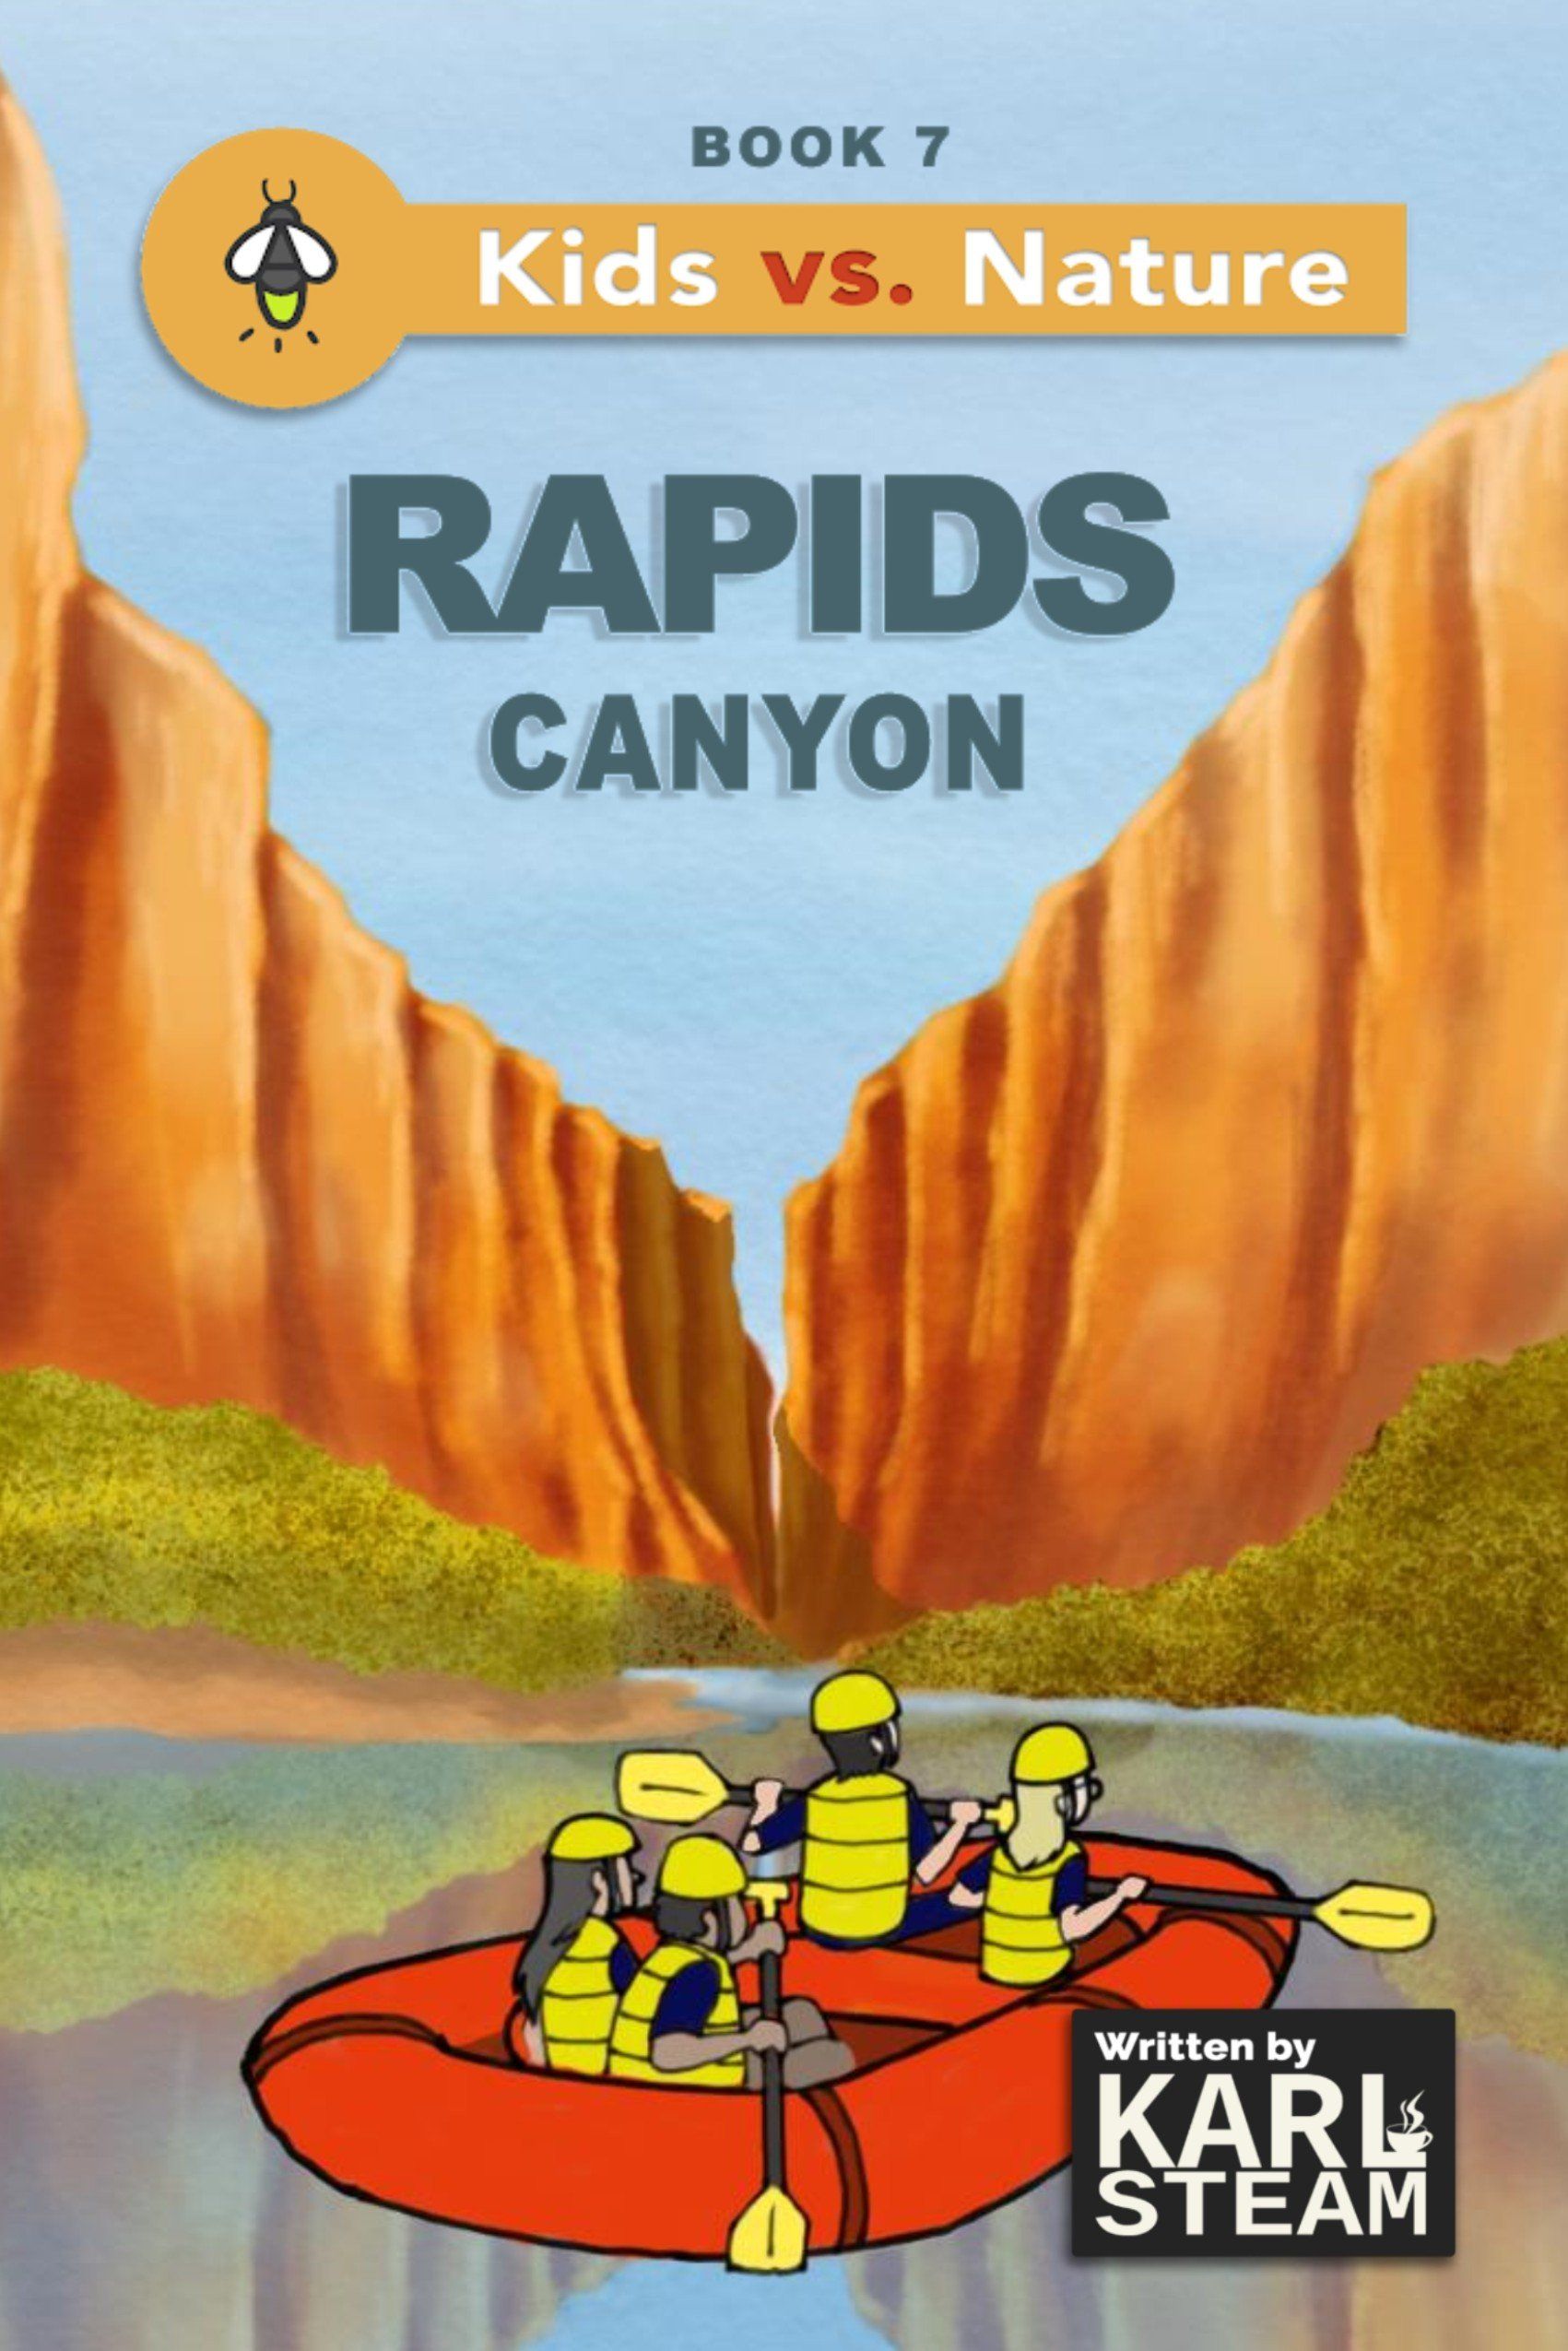 Book cover image of Surviving Rapids Canyon: Kids vs. Nature (Book 7) Four children paddling a whitewater raft on a river that is flowing through a deep canyon.  Written by Karl Steam.